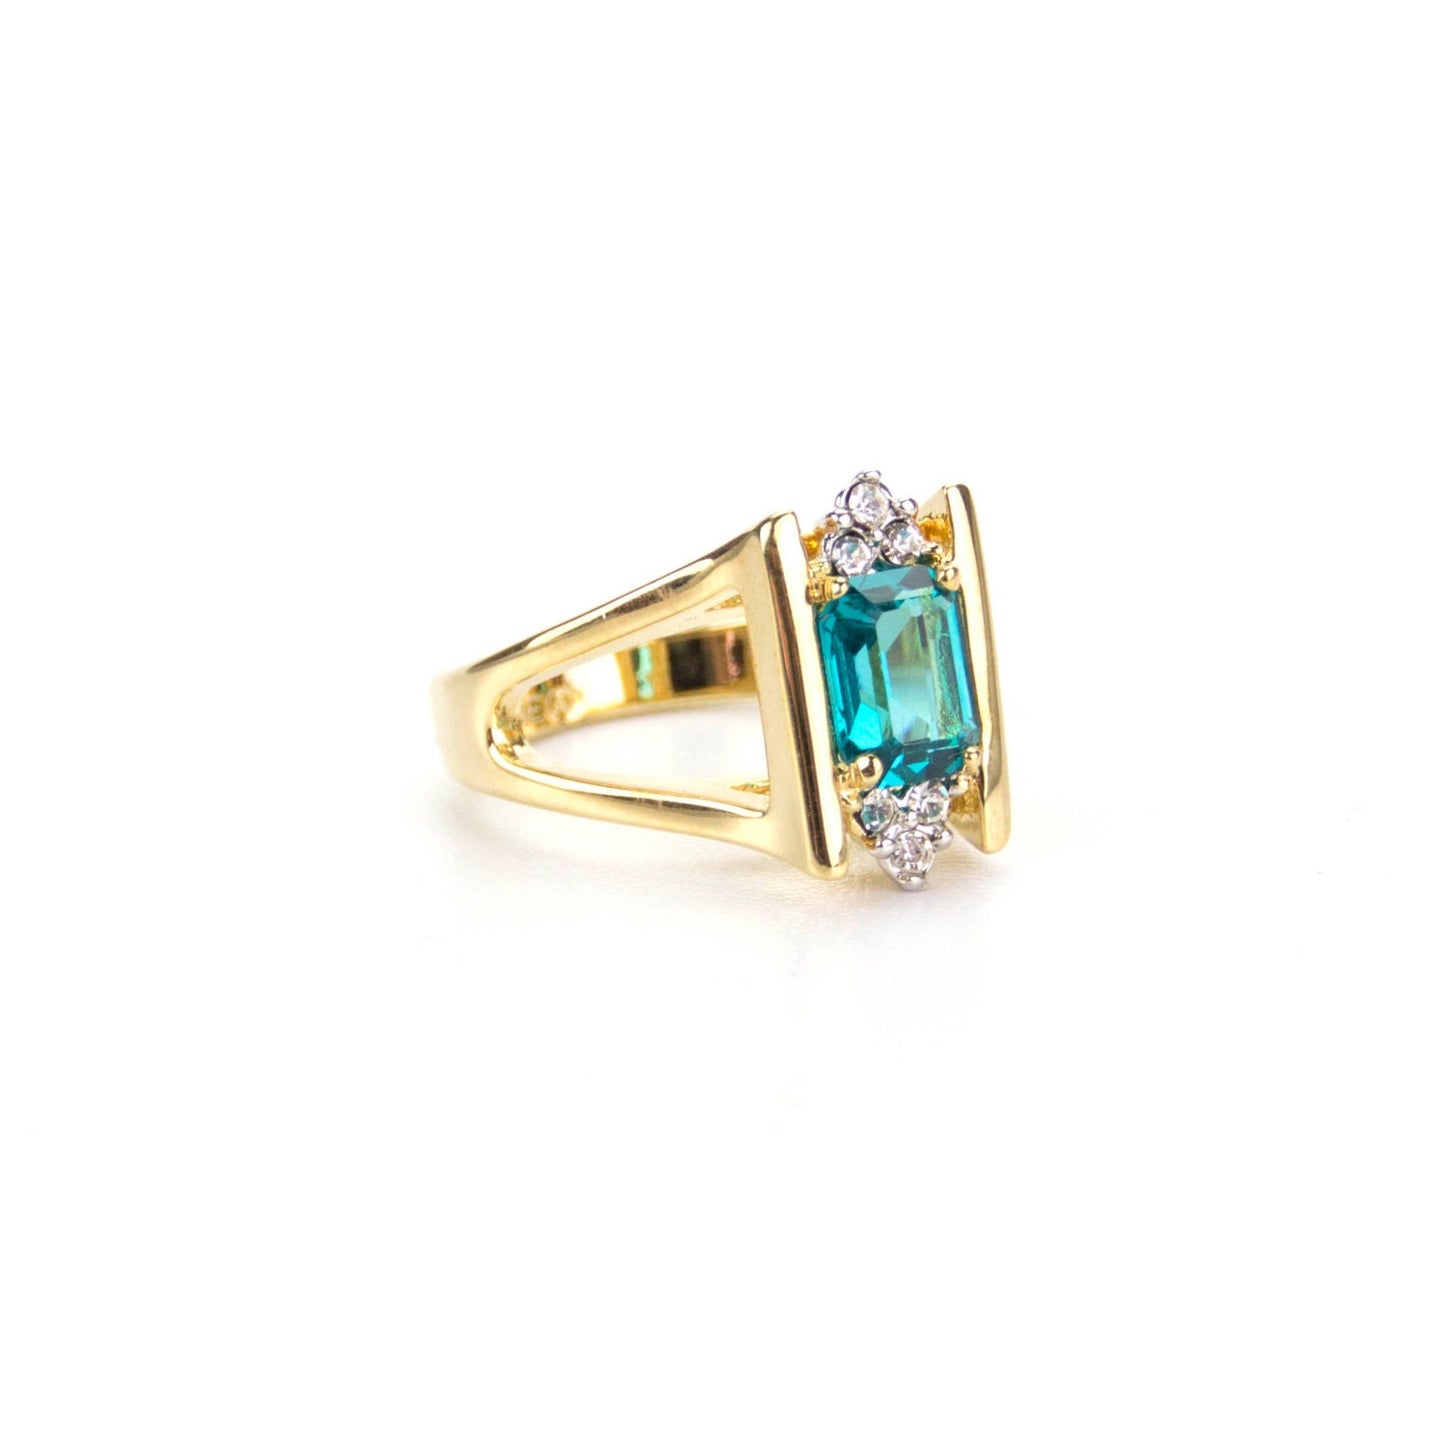 Vintage 1980s Zircon and Clear Swarovski Crystals 18k Gold December Birthstone Ring Antique Womans Jewelry #R1747